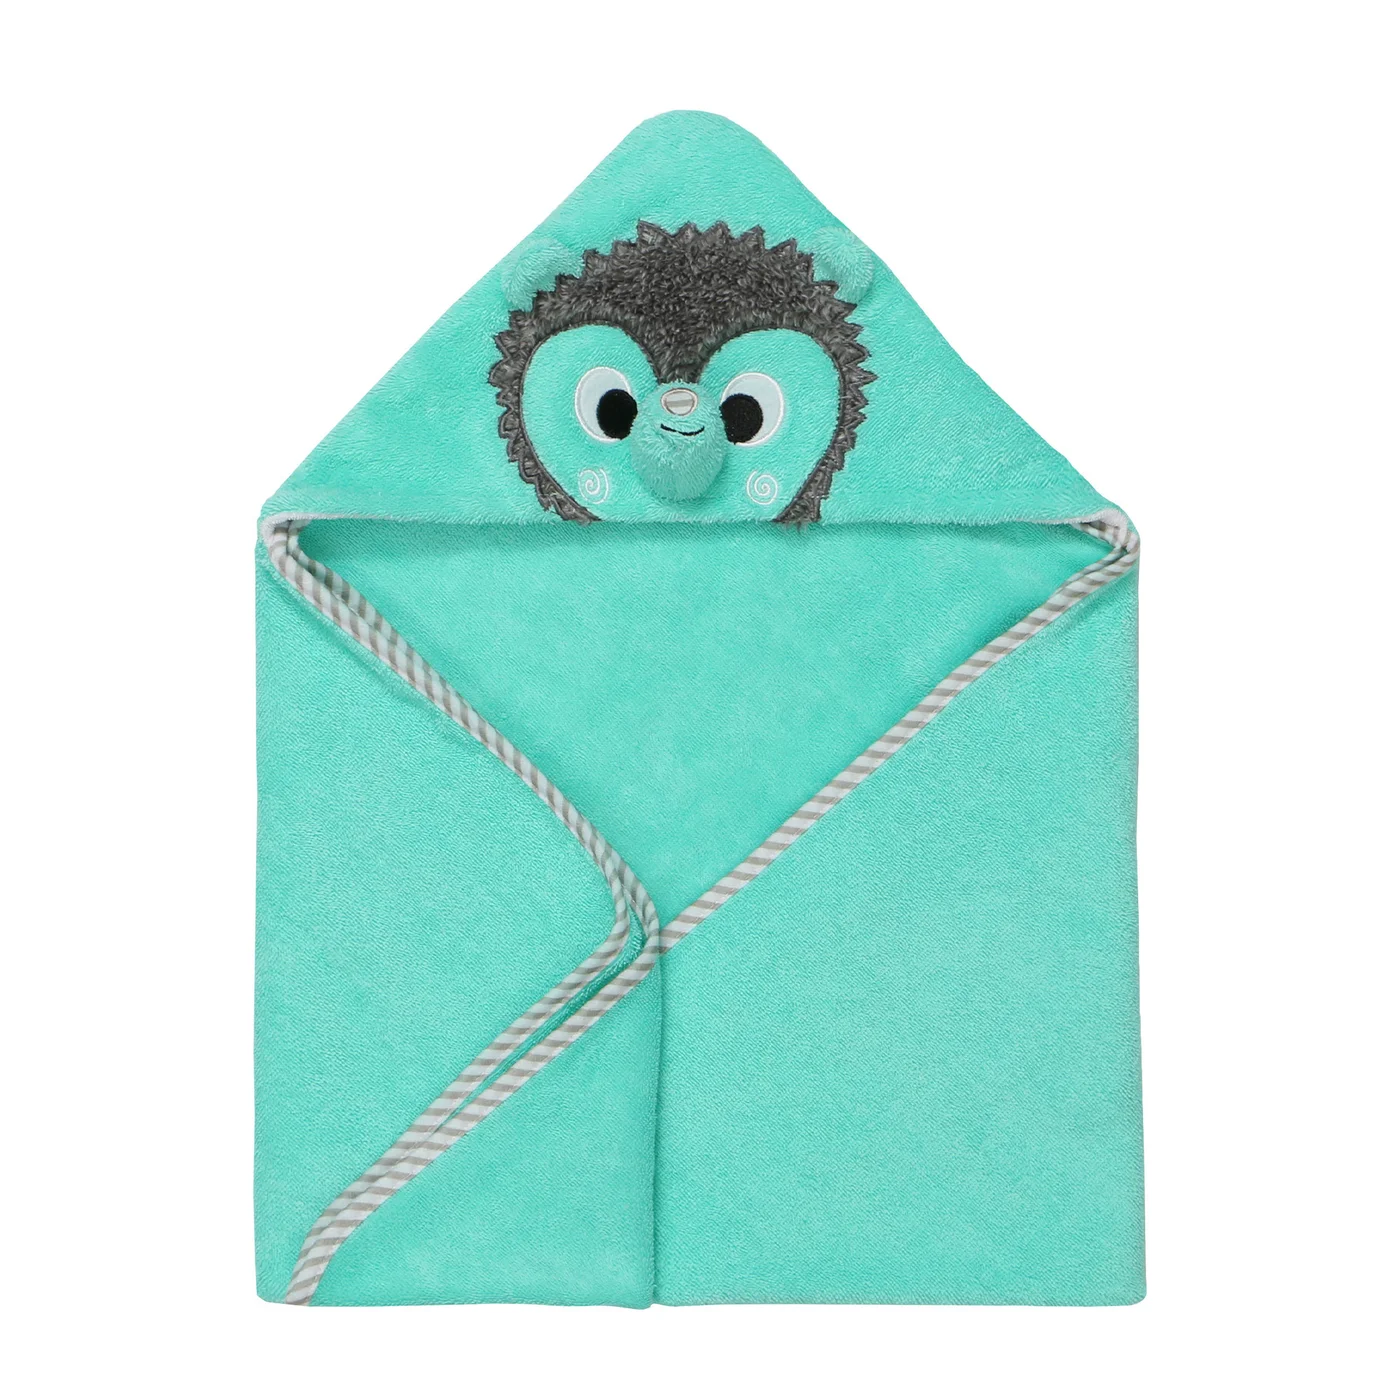 Baby Hooded Towel by Zoocchini (0-18 months)